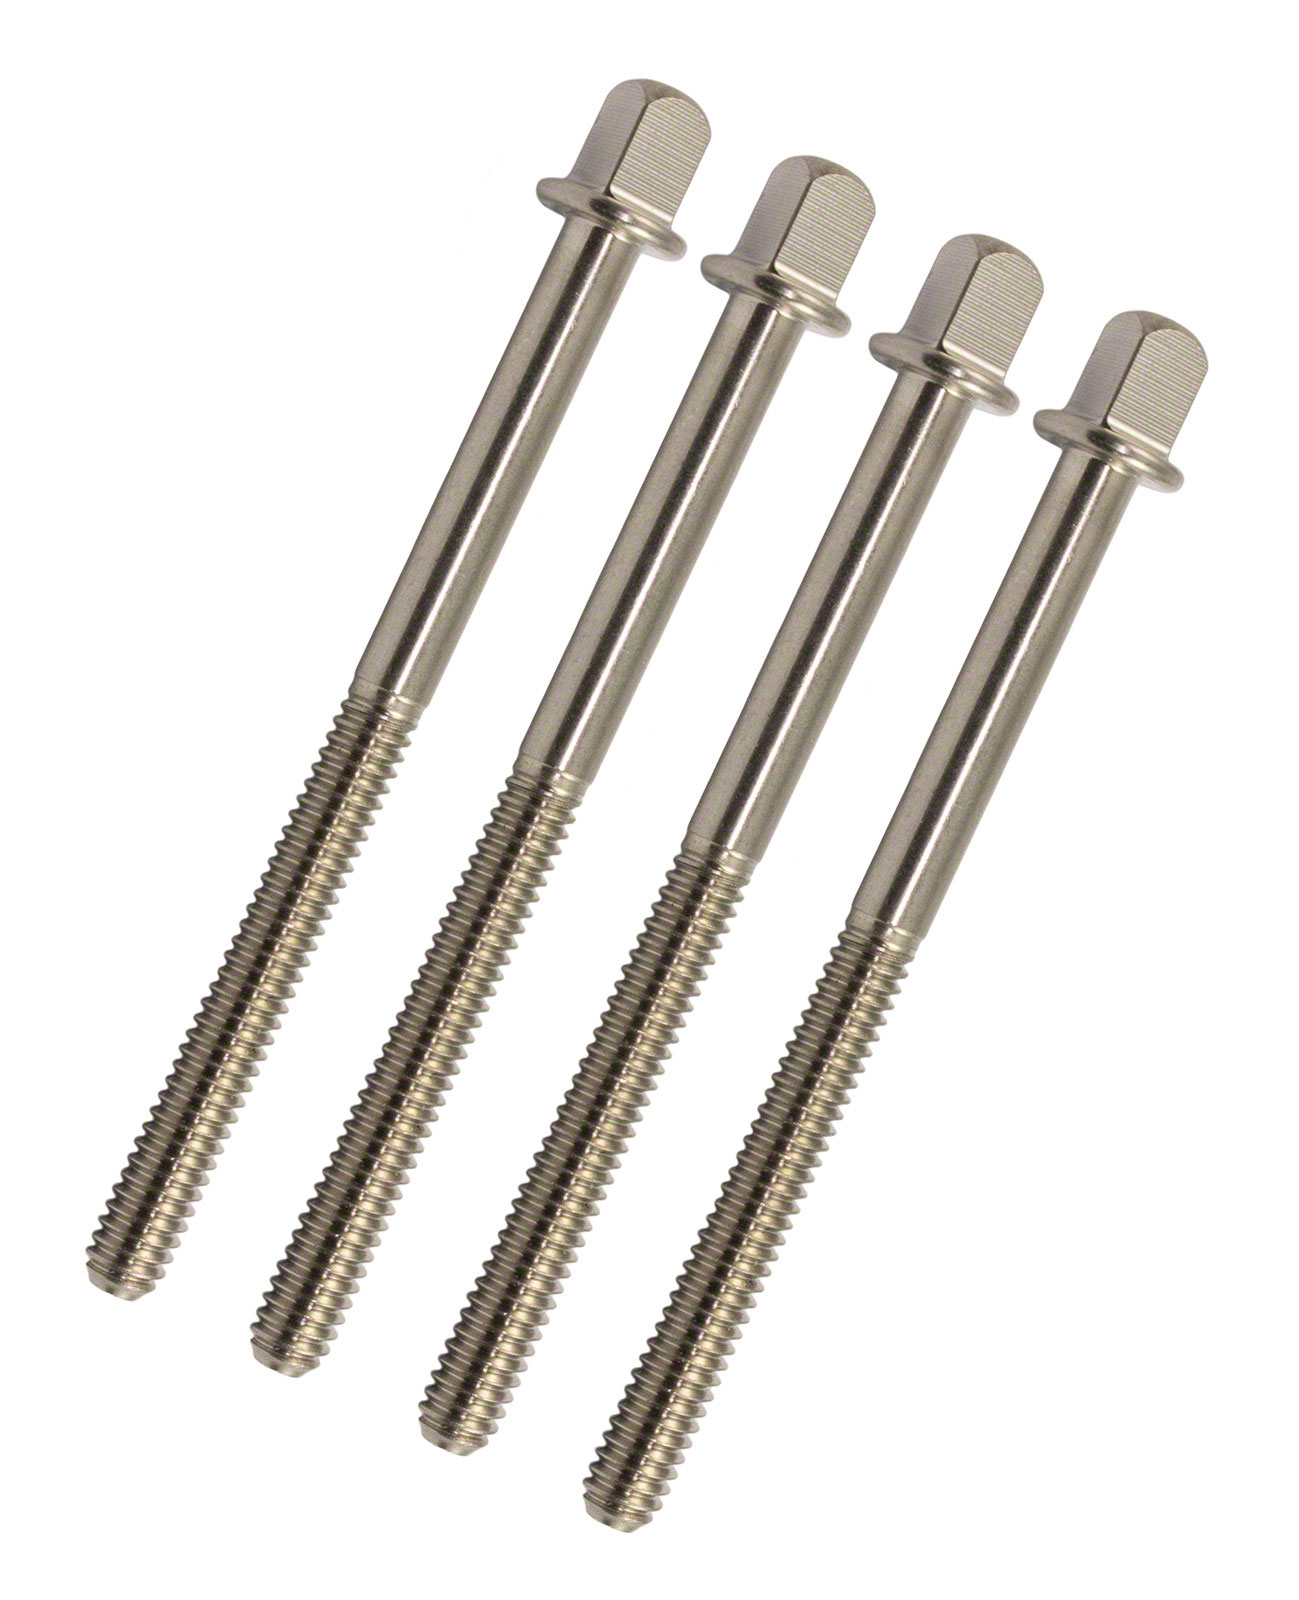 SPAREDRUM TRSS-71 - 71MM TENSION ROD - STAINLESS STEEL - 7/32